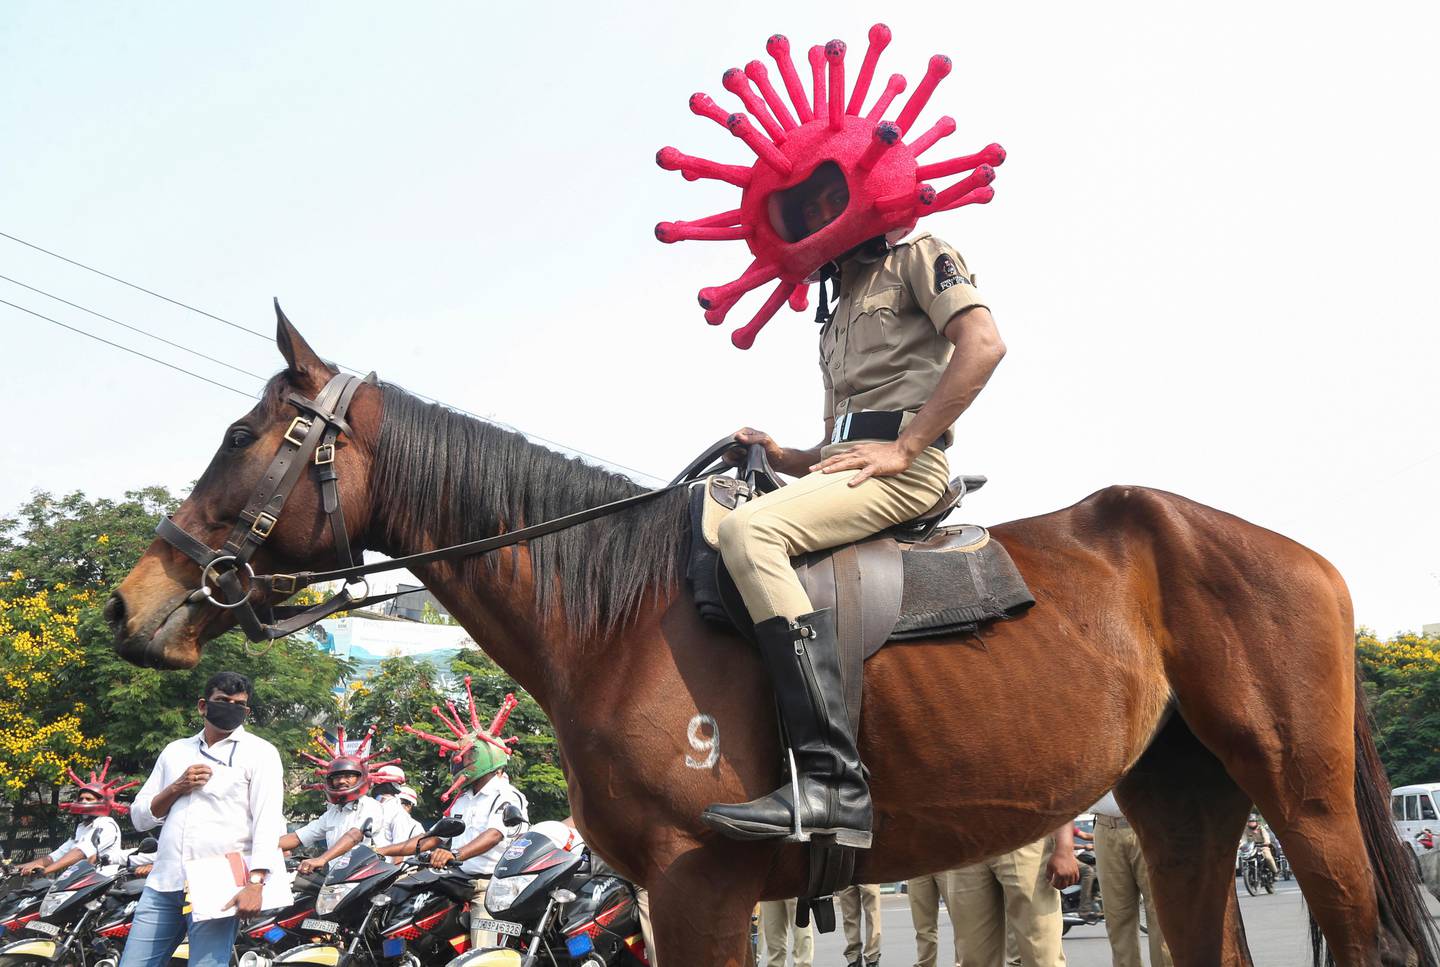 An Indian policeman wearing a virus themed helmet rides on a horse during an awareness rally aimed at preventing the spread of new coronavirus in Hyderabad, India, Thursday, April 2, 2020. The new coronavirus causes mild or moderate symptoms for most people, but for some, especially older adults and people with existing health problems, it can cause more severe illness or death. (AP Photo/Mahesh Kumar A.)